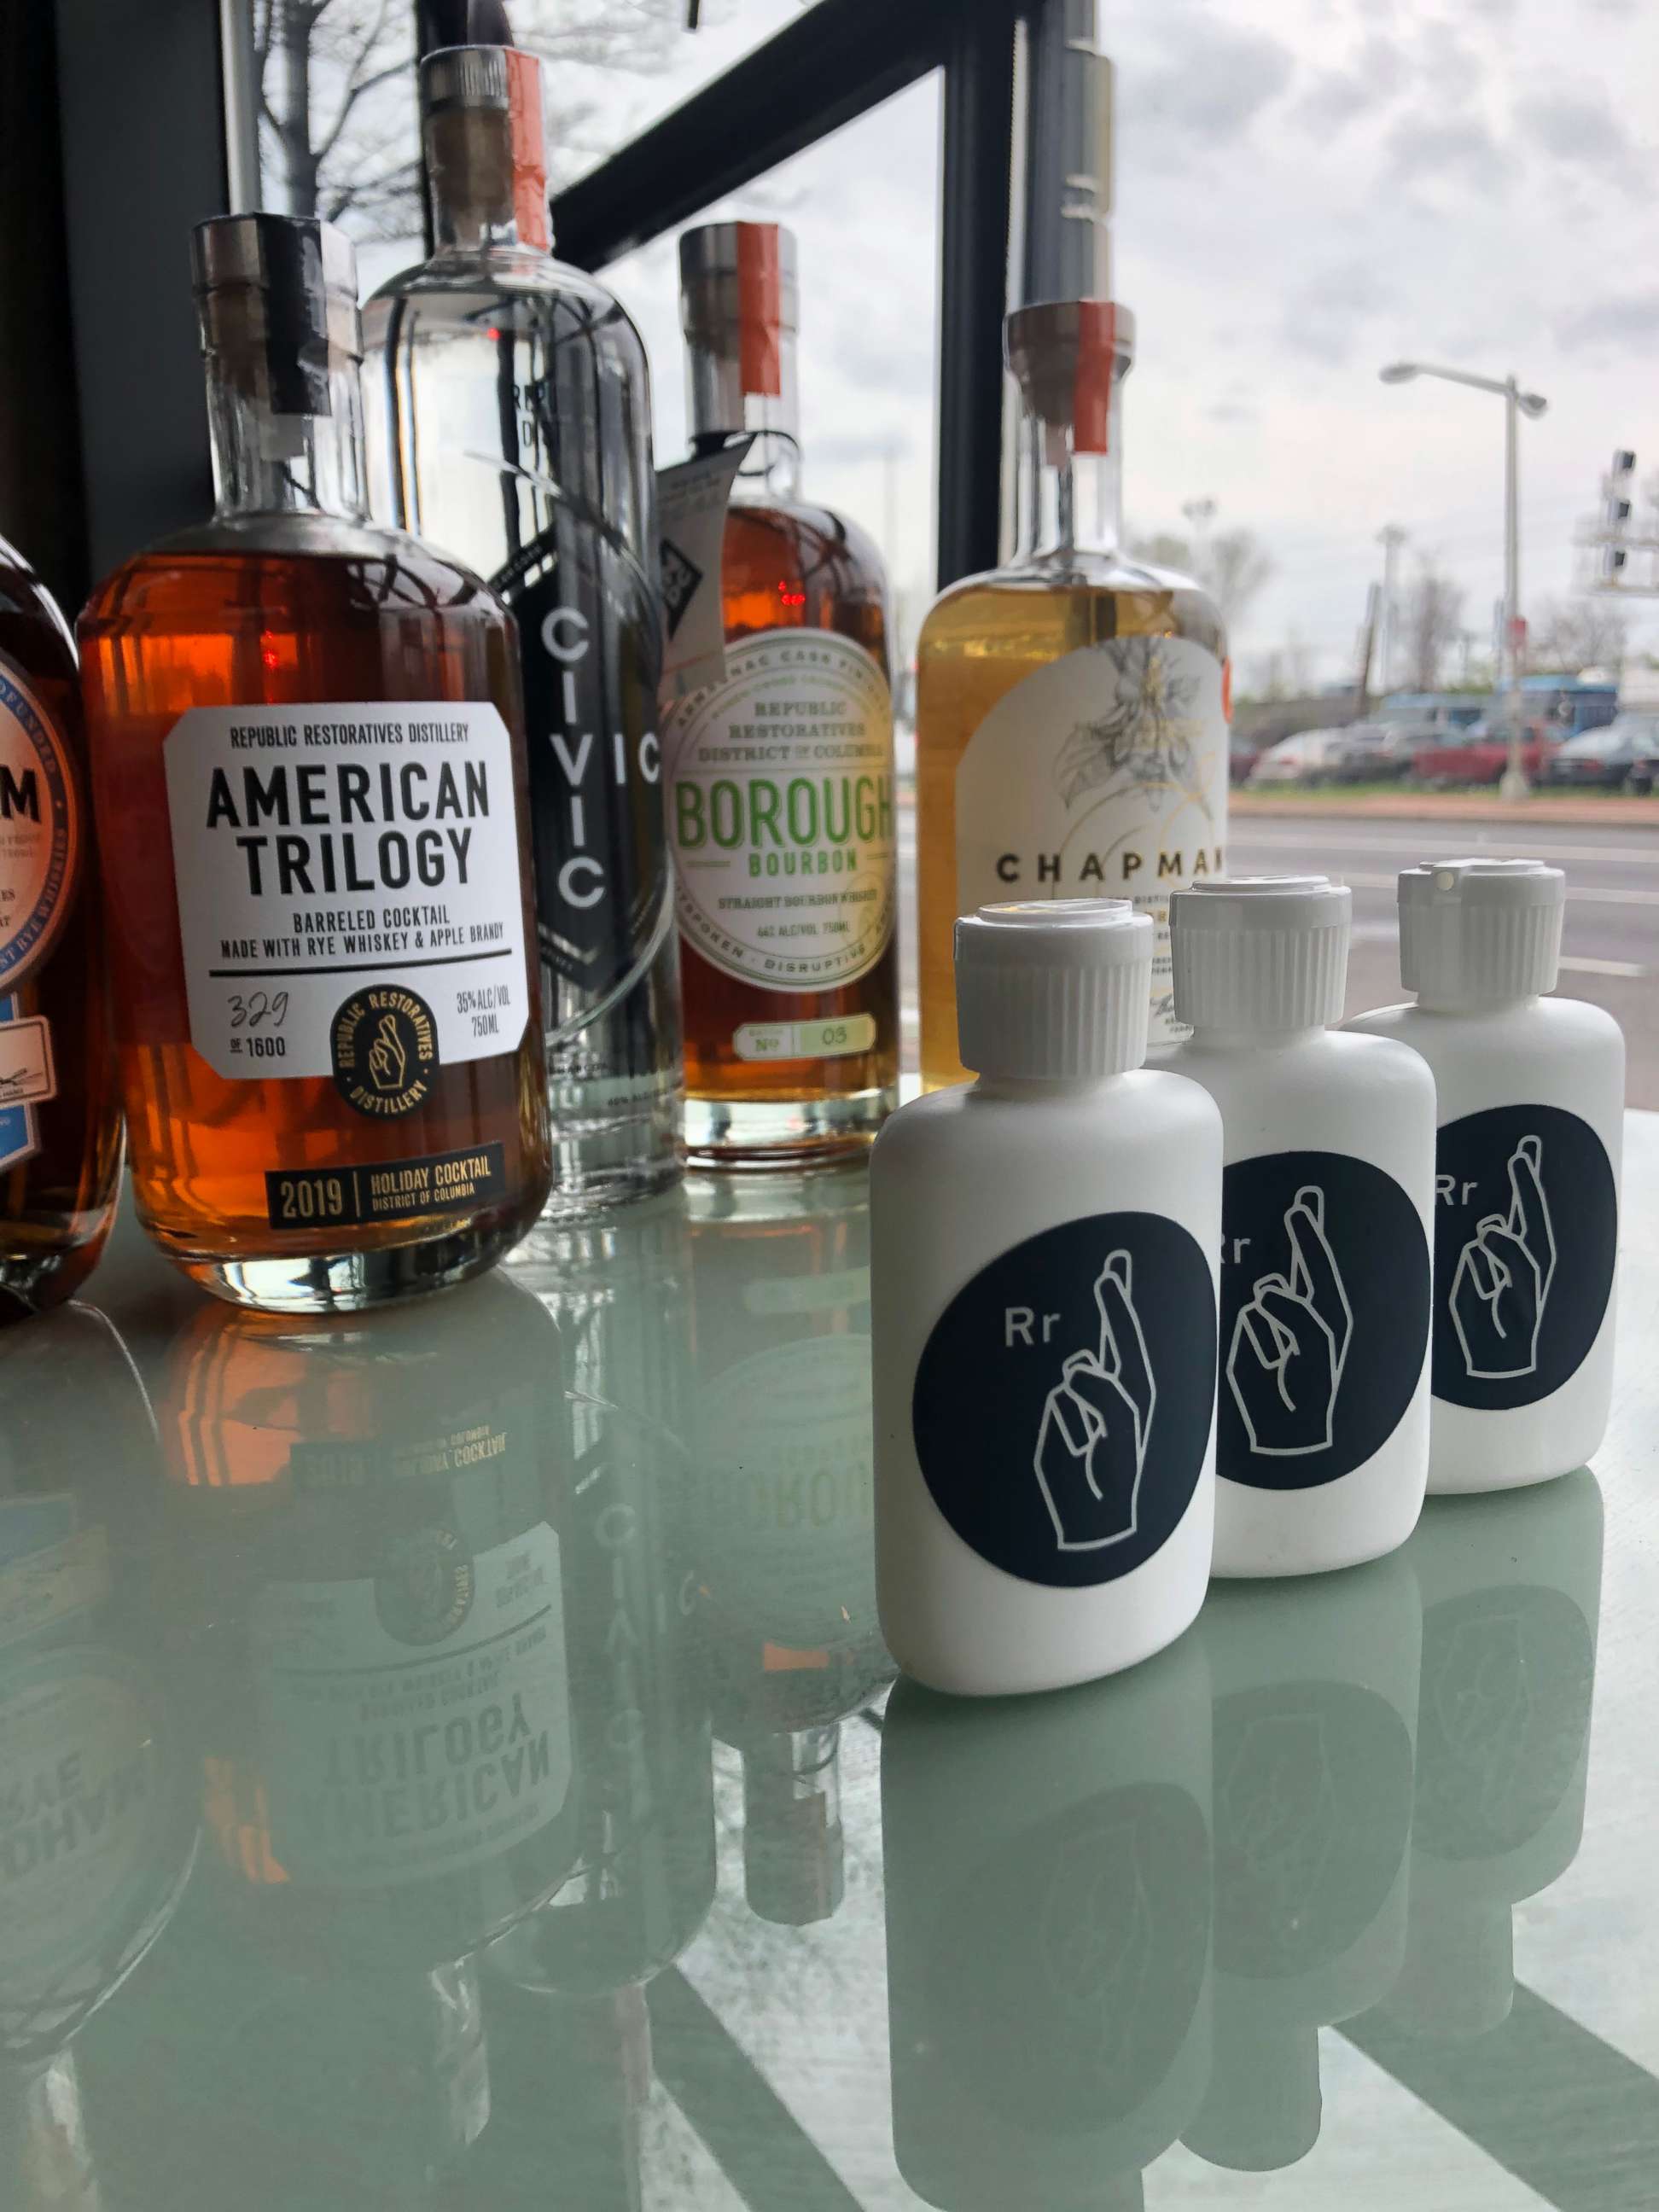 PHOTO: Craft distilleries, like Republic Restoratives Distillery in Washington, D.C., have scrambled to meet demand for hand sanitizer by using in-house alcohol to produce their own.